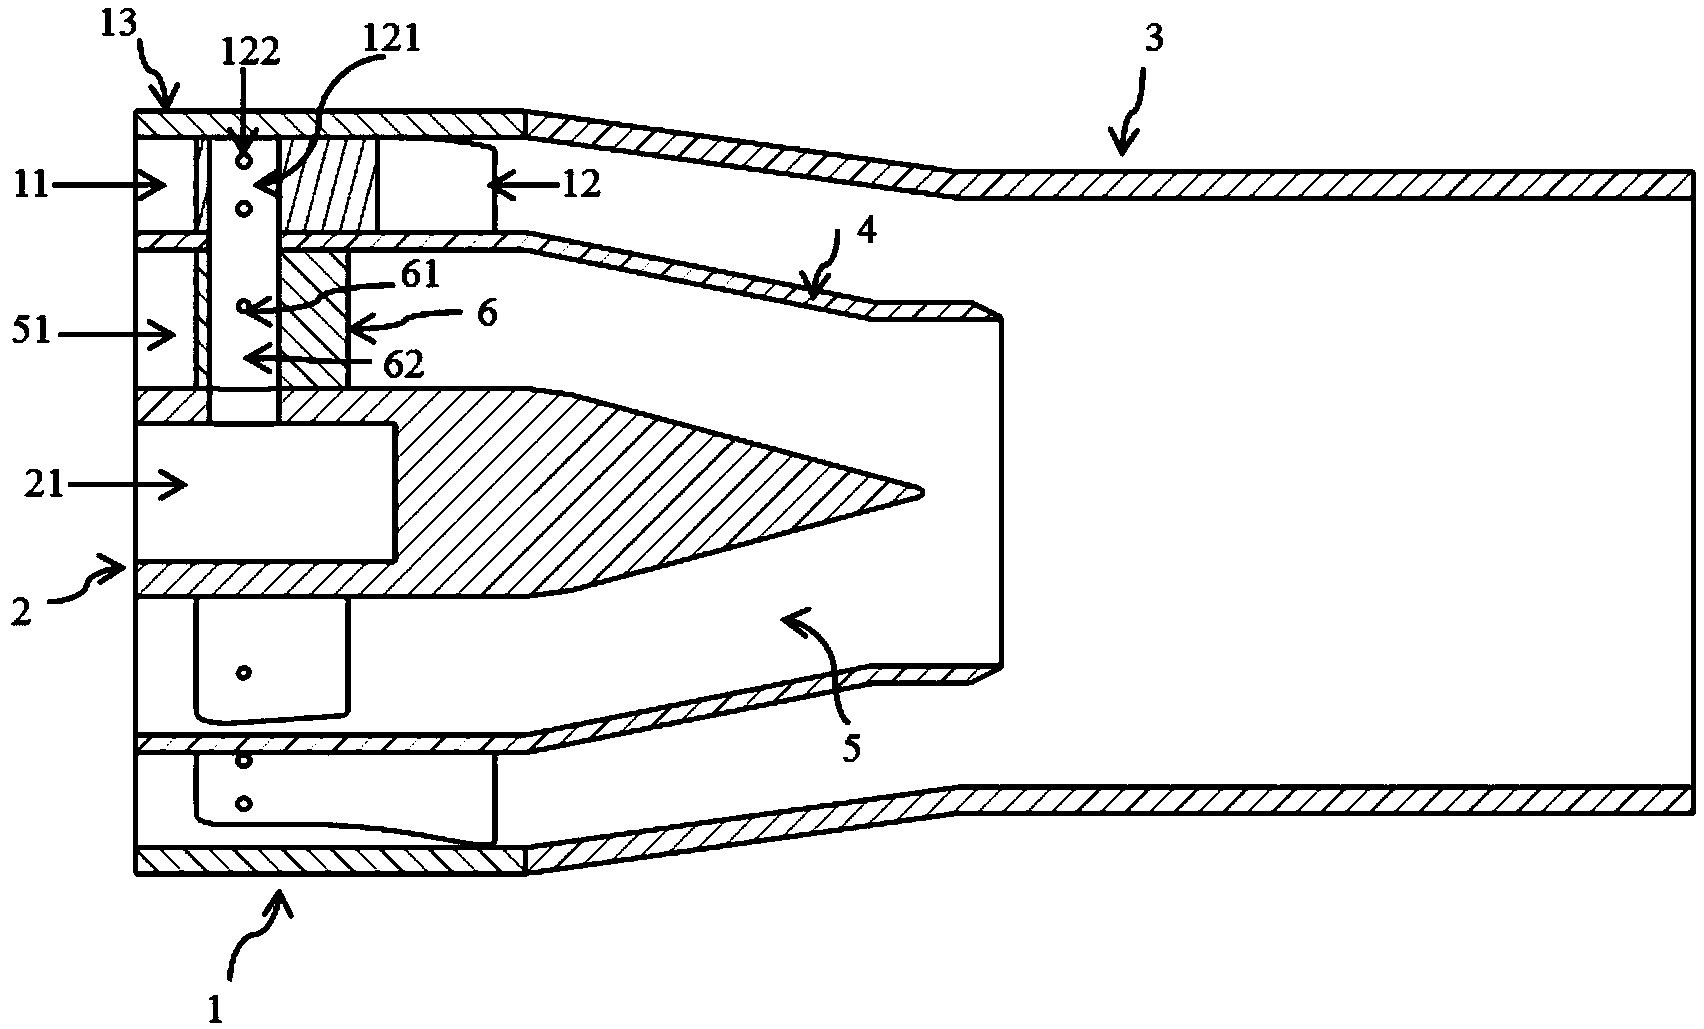 Premixing nozzle of gas turbine combustion chamber